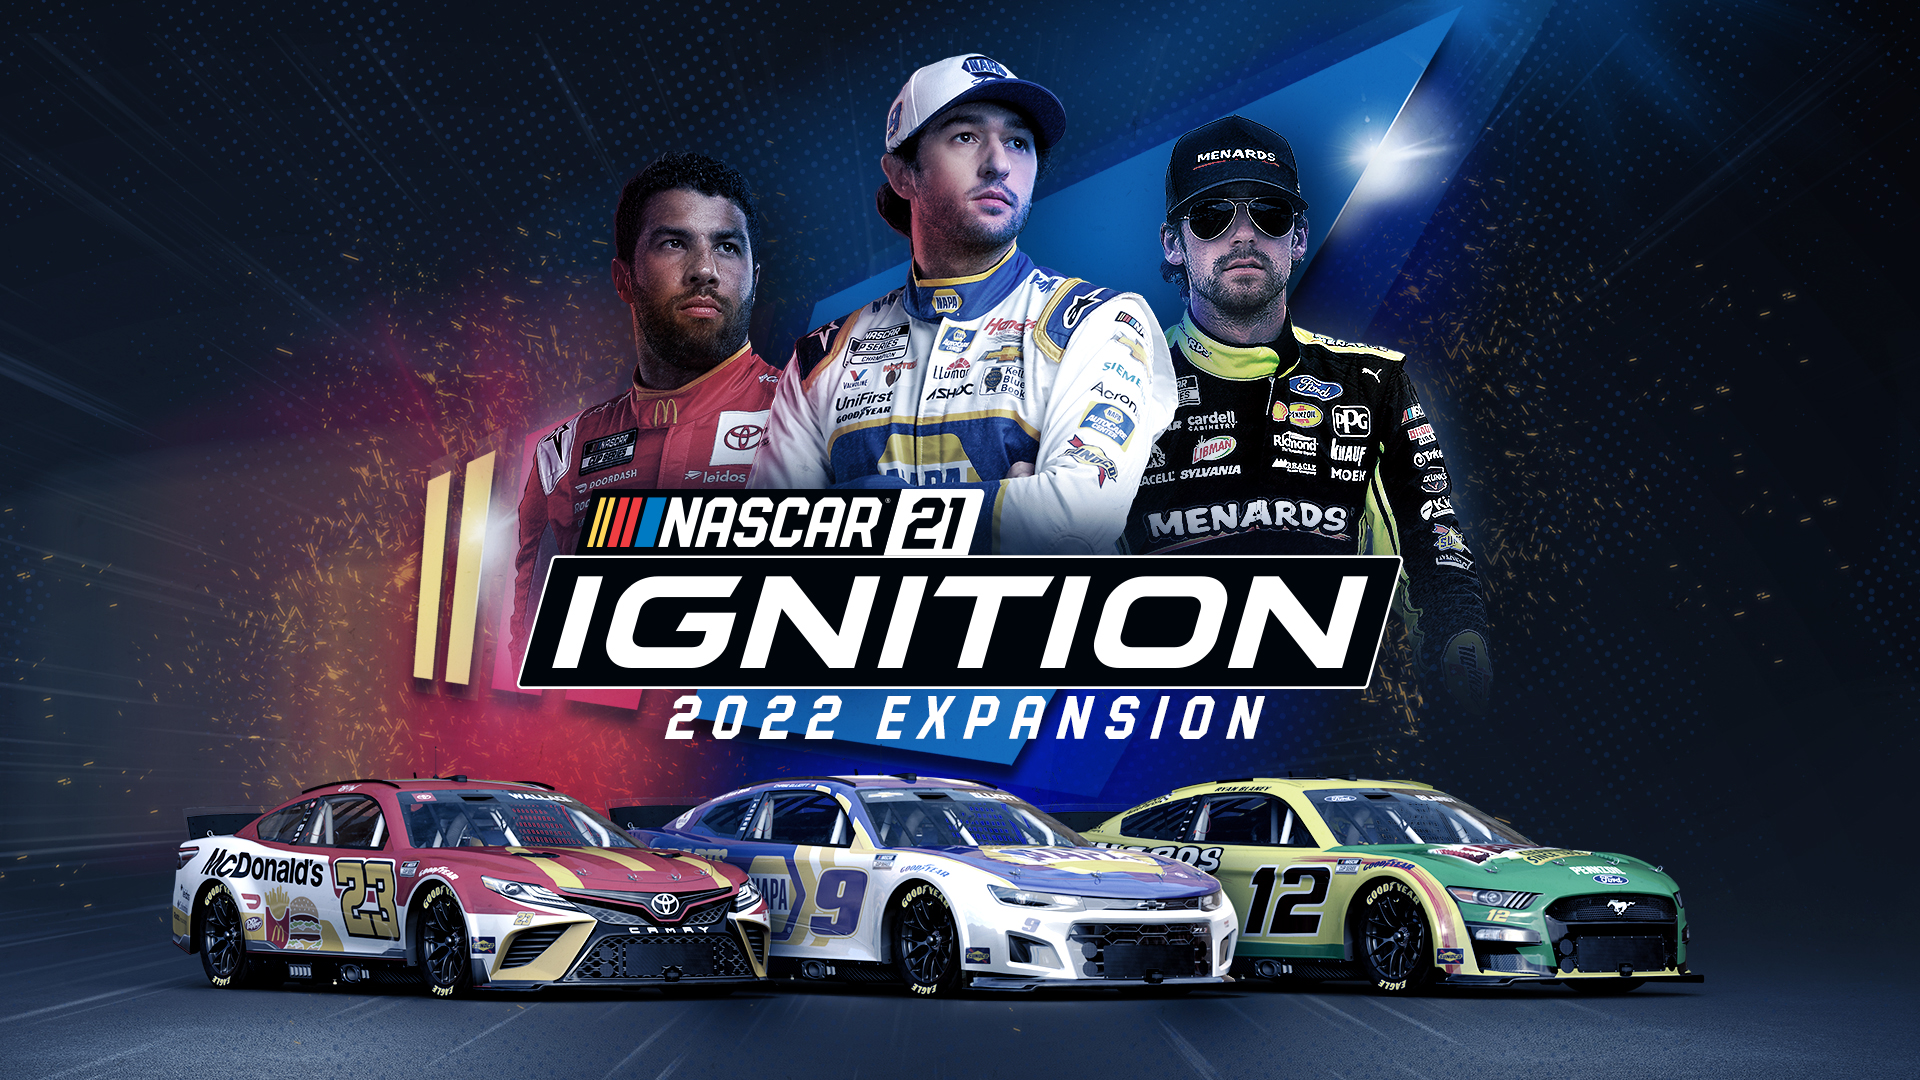 MOTORSPORT GAMES RELEASES 2022 SEASON EXPANSION UPDATE FOR NASCAR 21 IGNITION, AVAILABLE TODAY